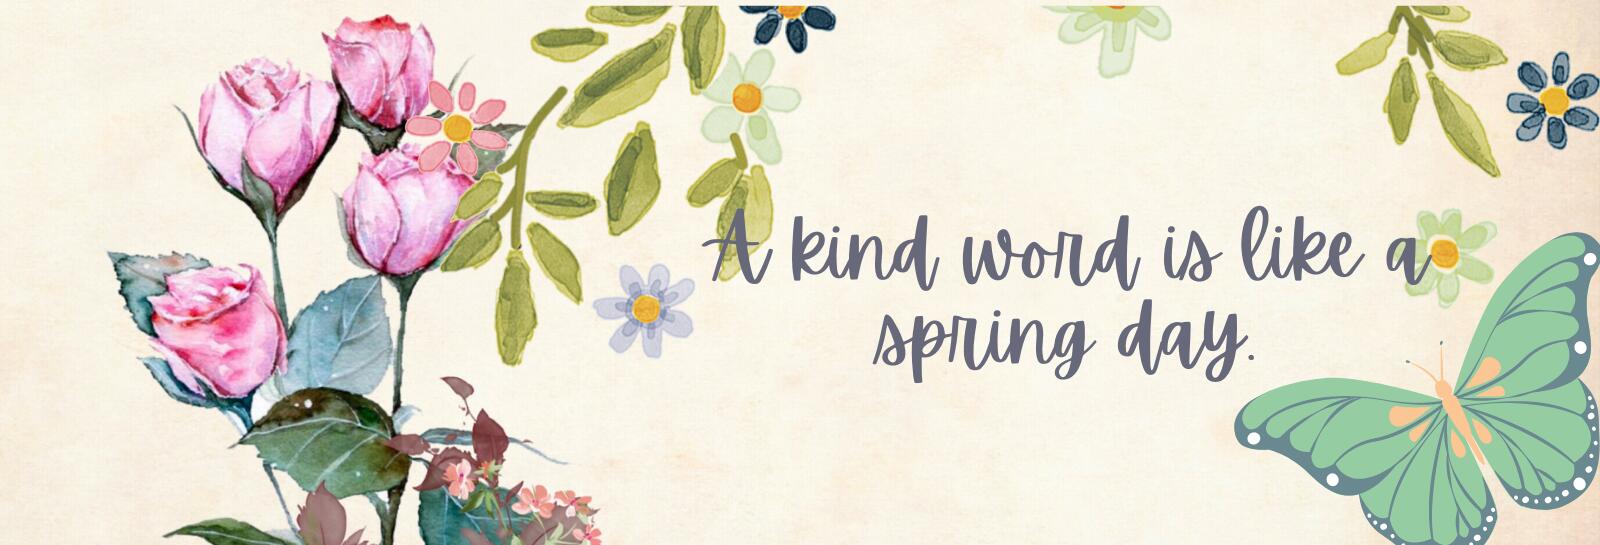 spring flowers show kindness